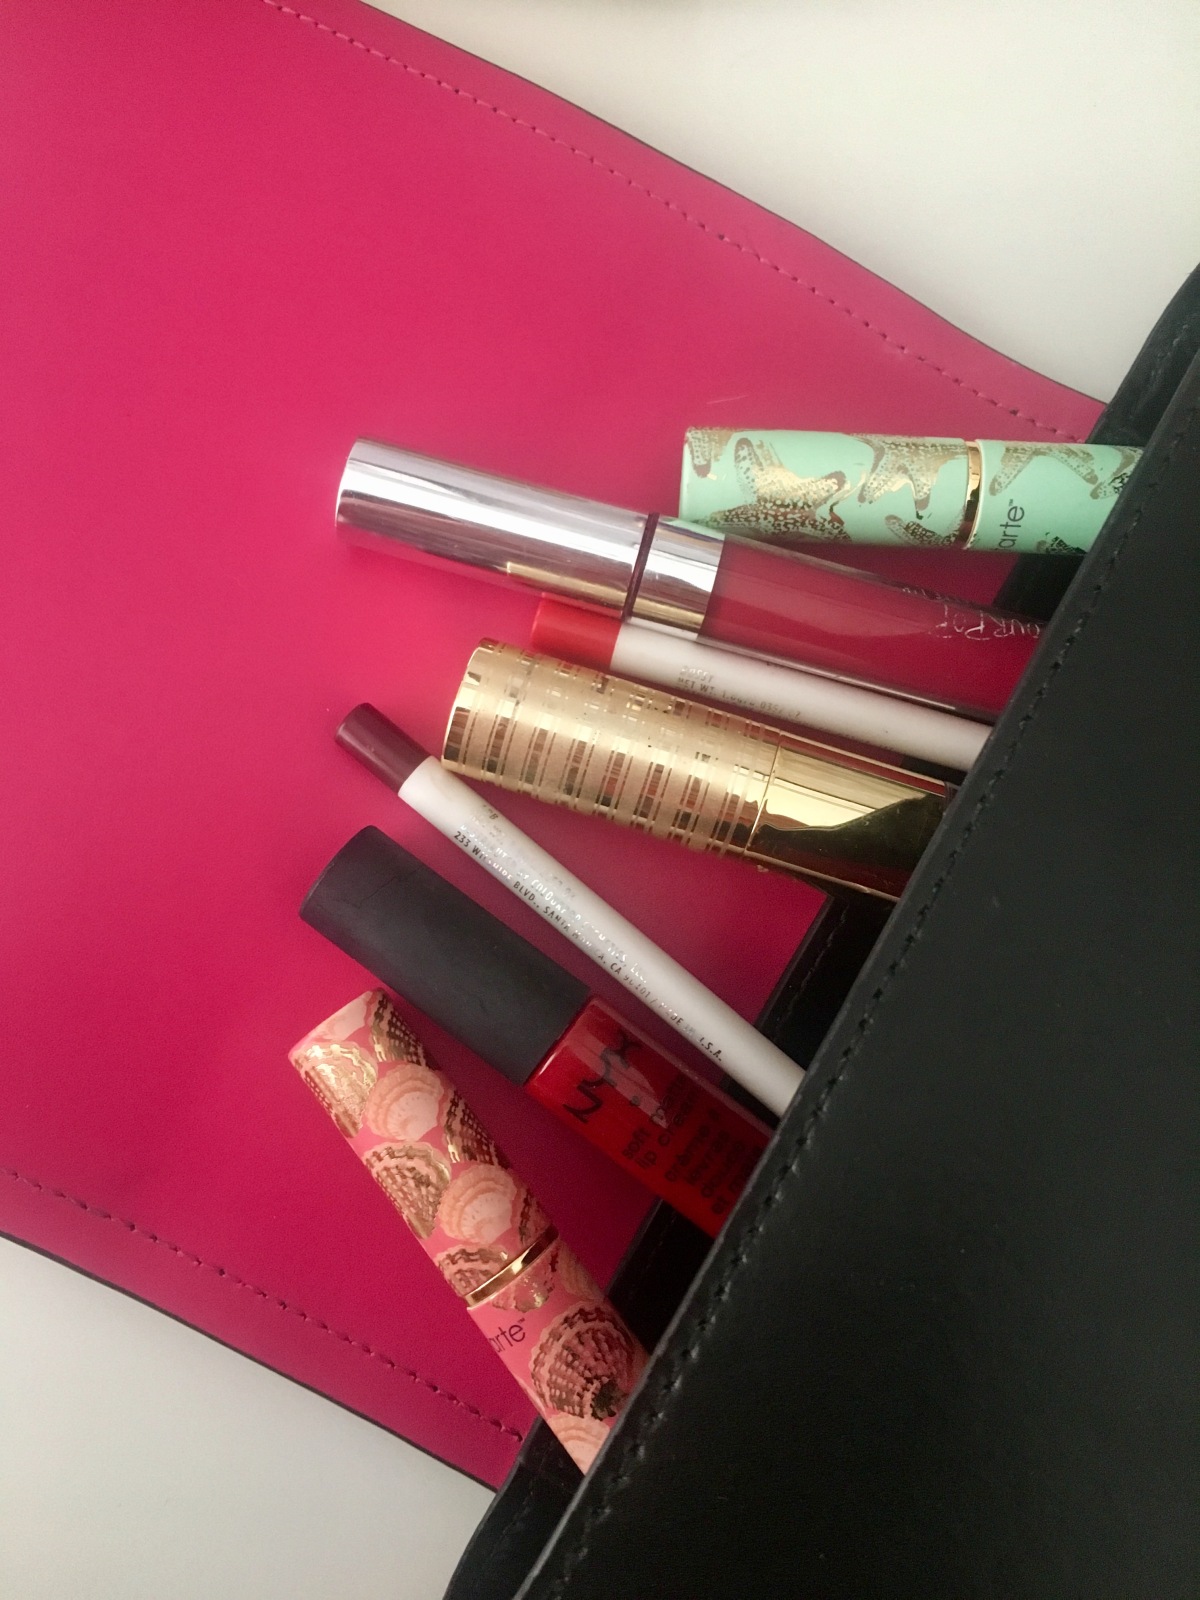 What I Wore to Work in a Week – Lipstick Edition